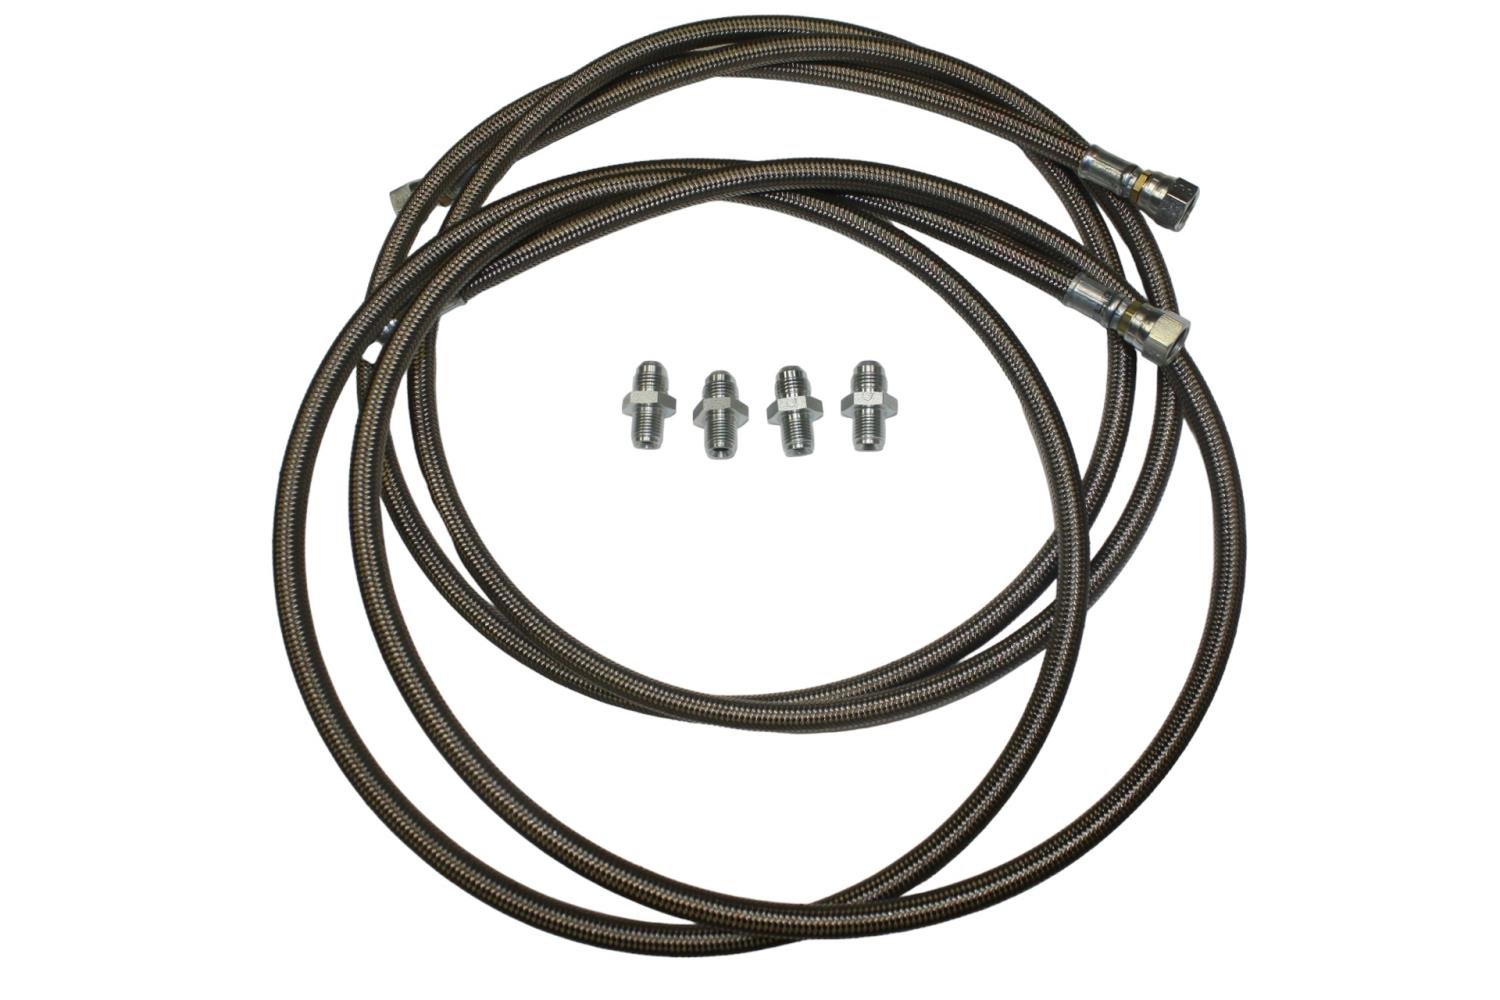 Advance Adapters 23-1501: Auto Transmission Cooler Lines, Fits TH350,  TH400, 700R Transmissions, 7 ft. Line/Hose, Pre Crimped Hose Ends, -6AN  Male Fittings, 5/16 in. Inverted Flare Adapters